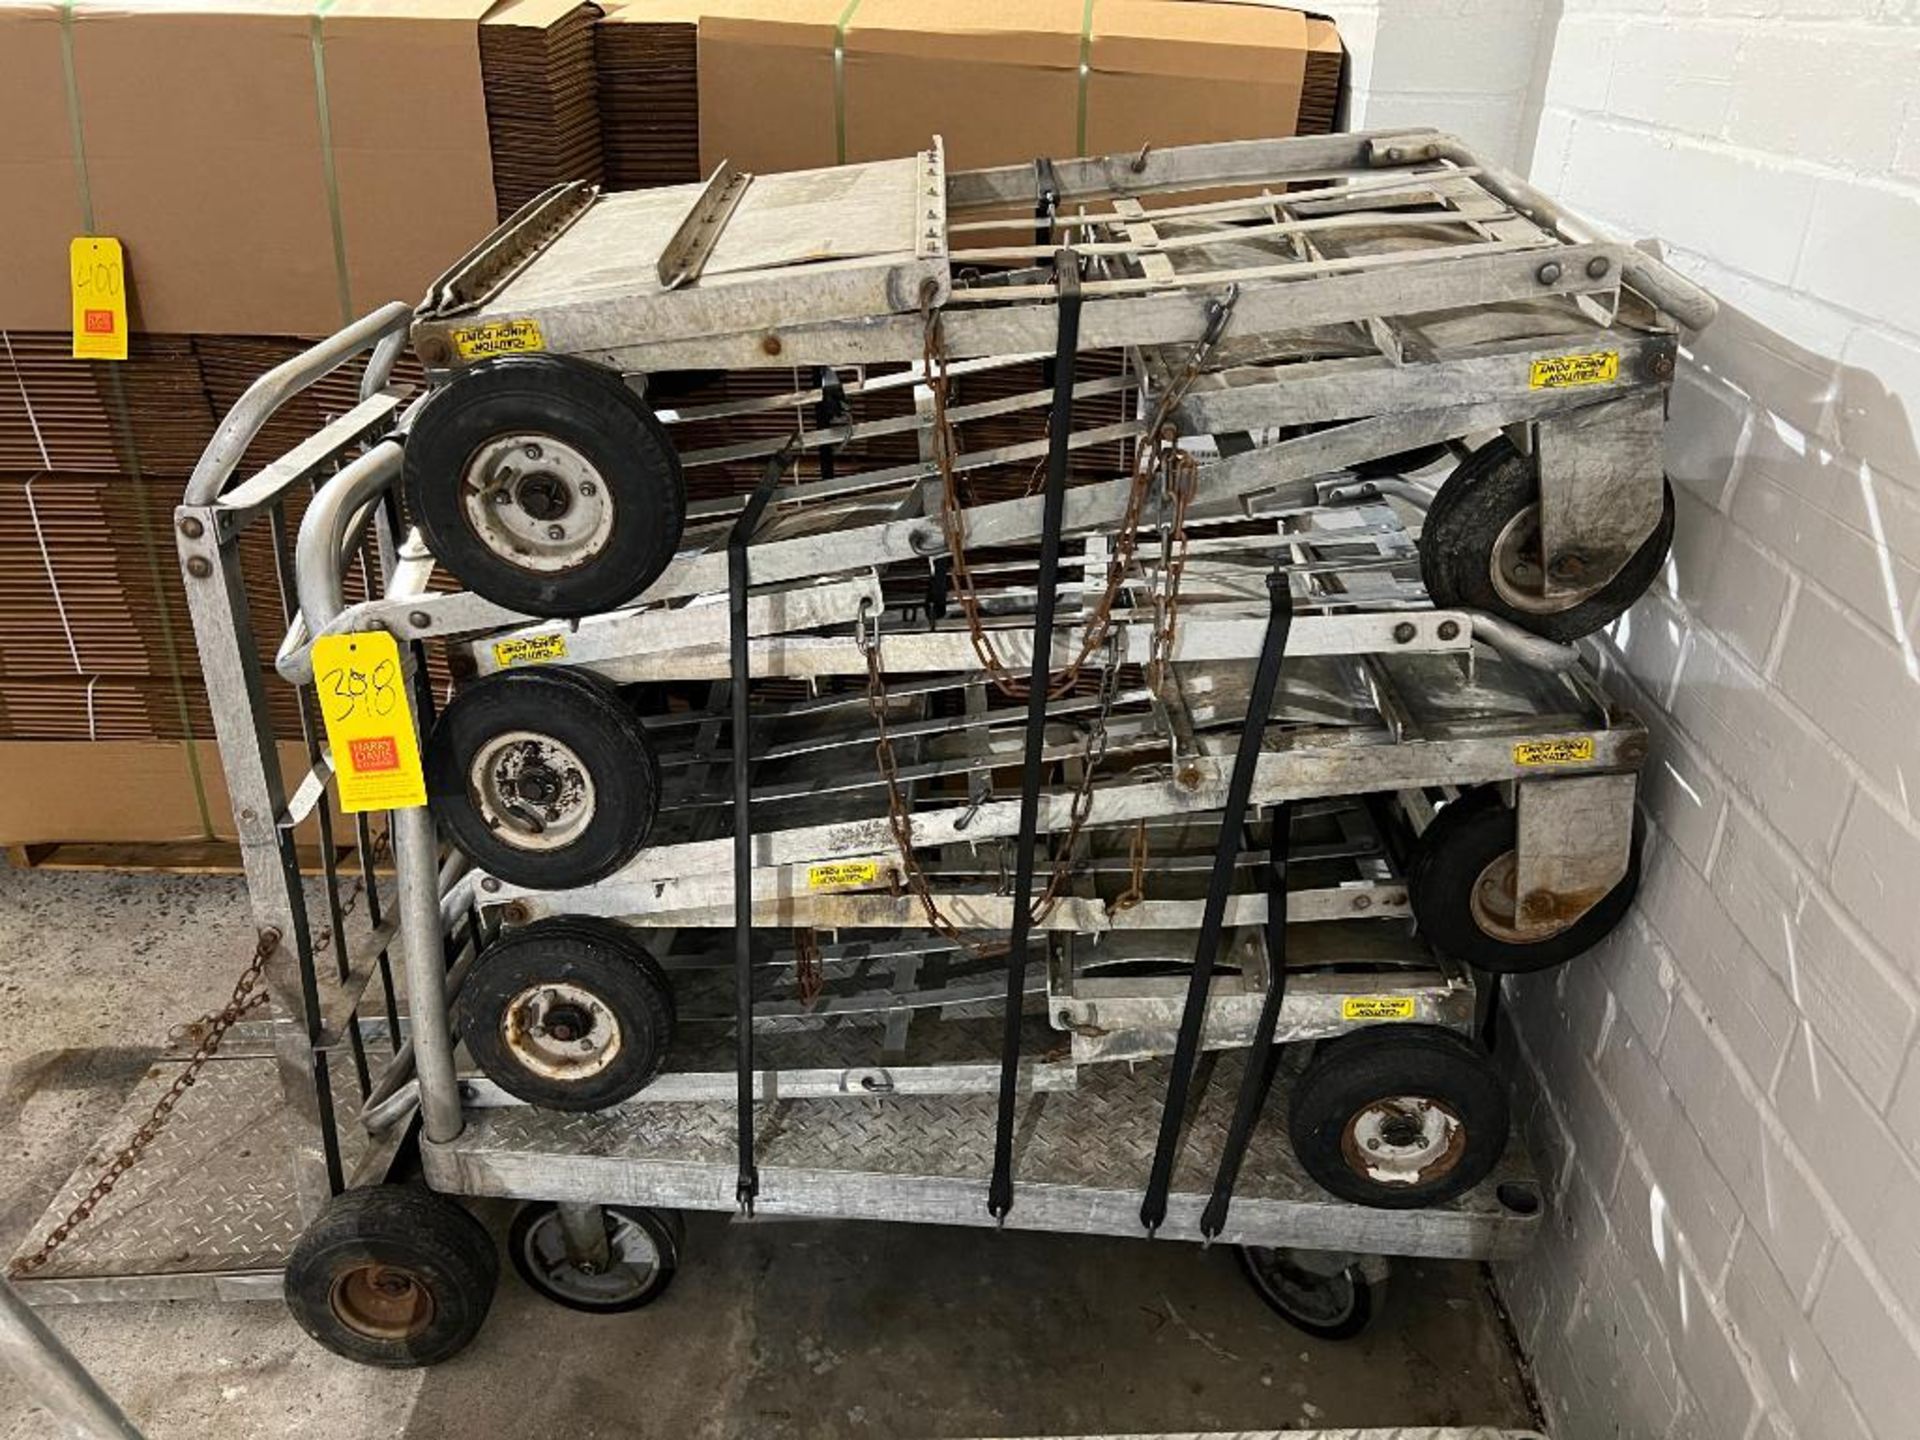 Collapsible S/S Hand Trucks - Rigging Fee: $100